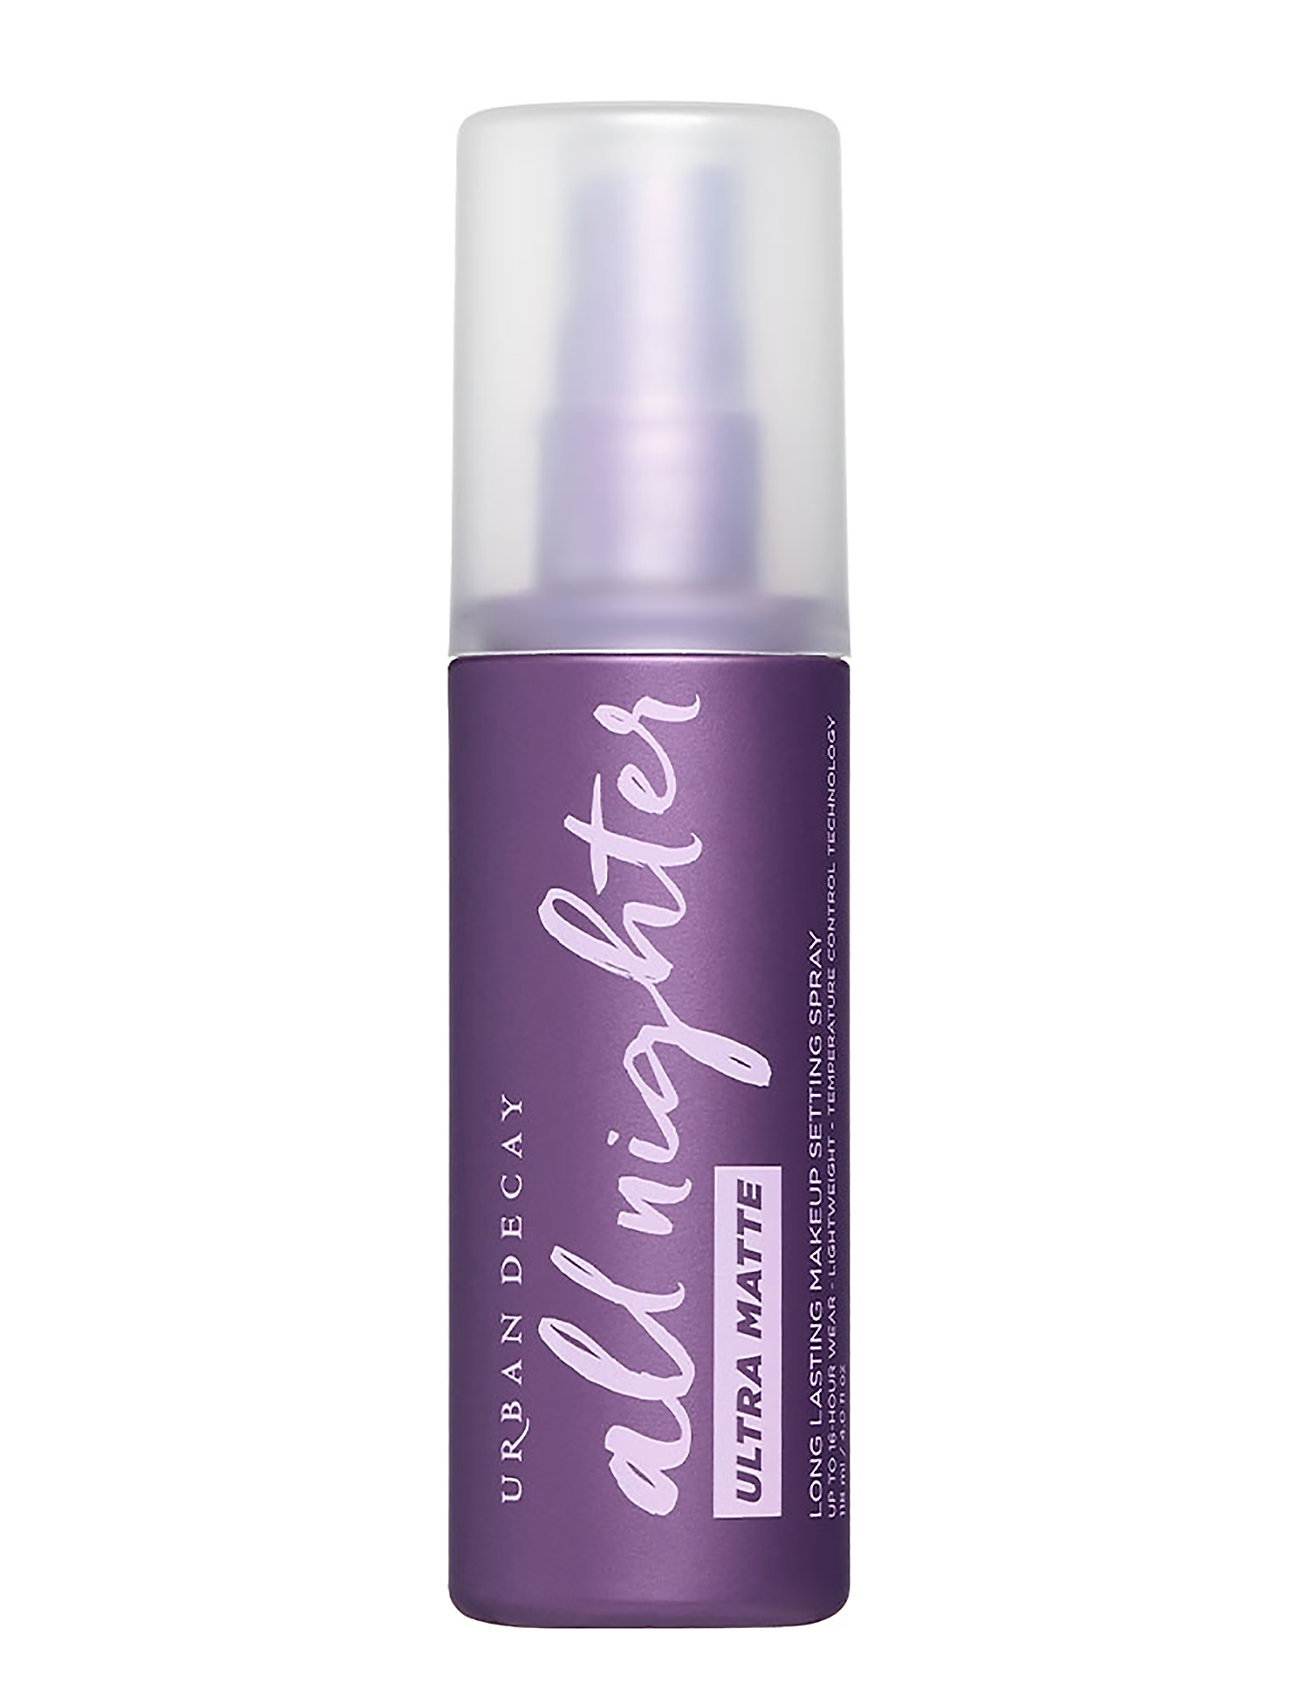 All Nighter Setting Spray Ultra Matte Setting Spray Makeup Multi/patterned Urban Decay